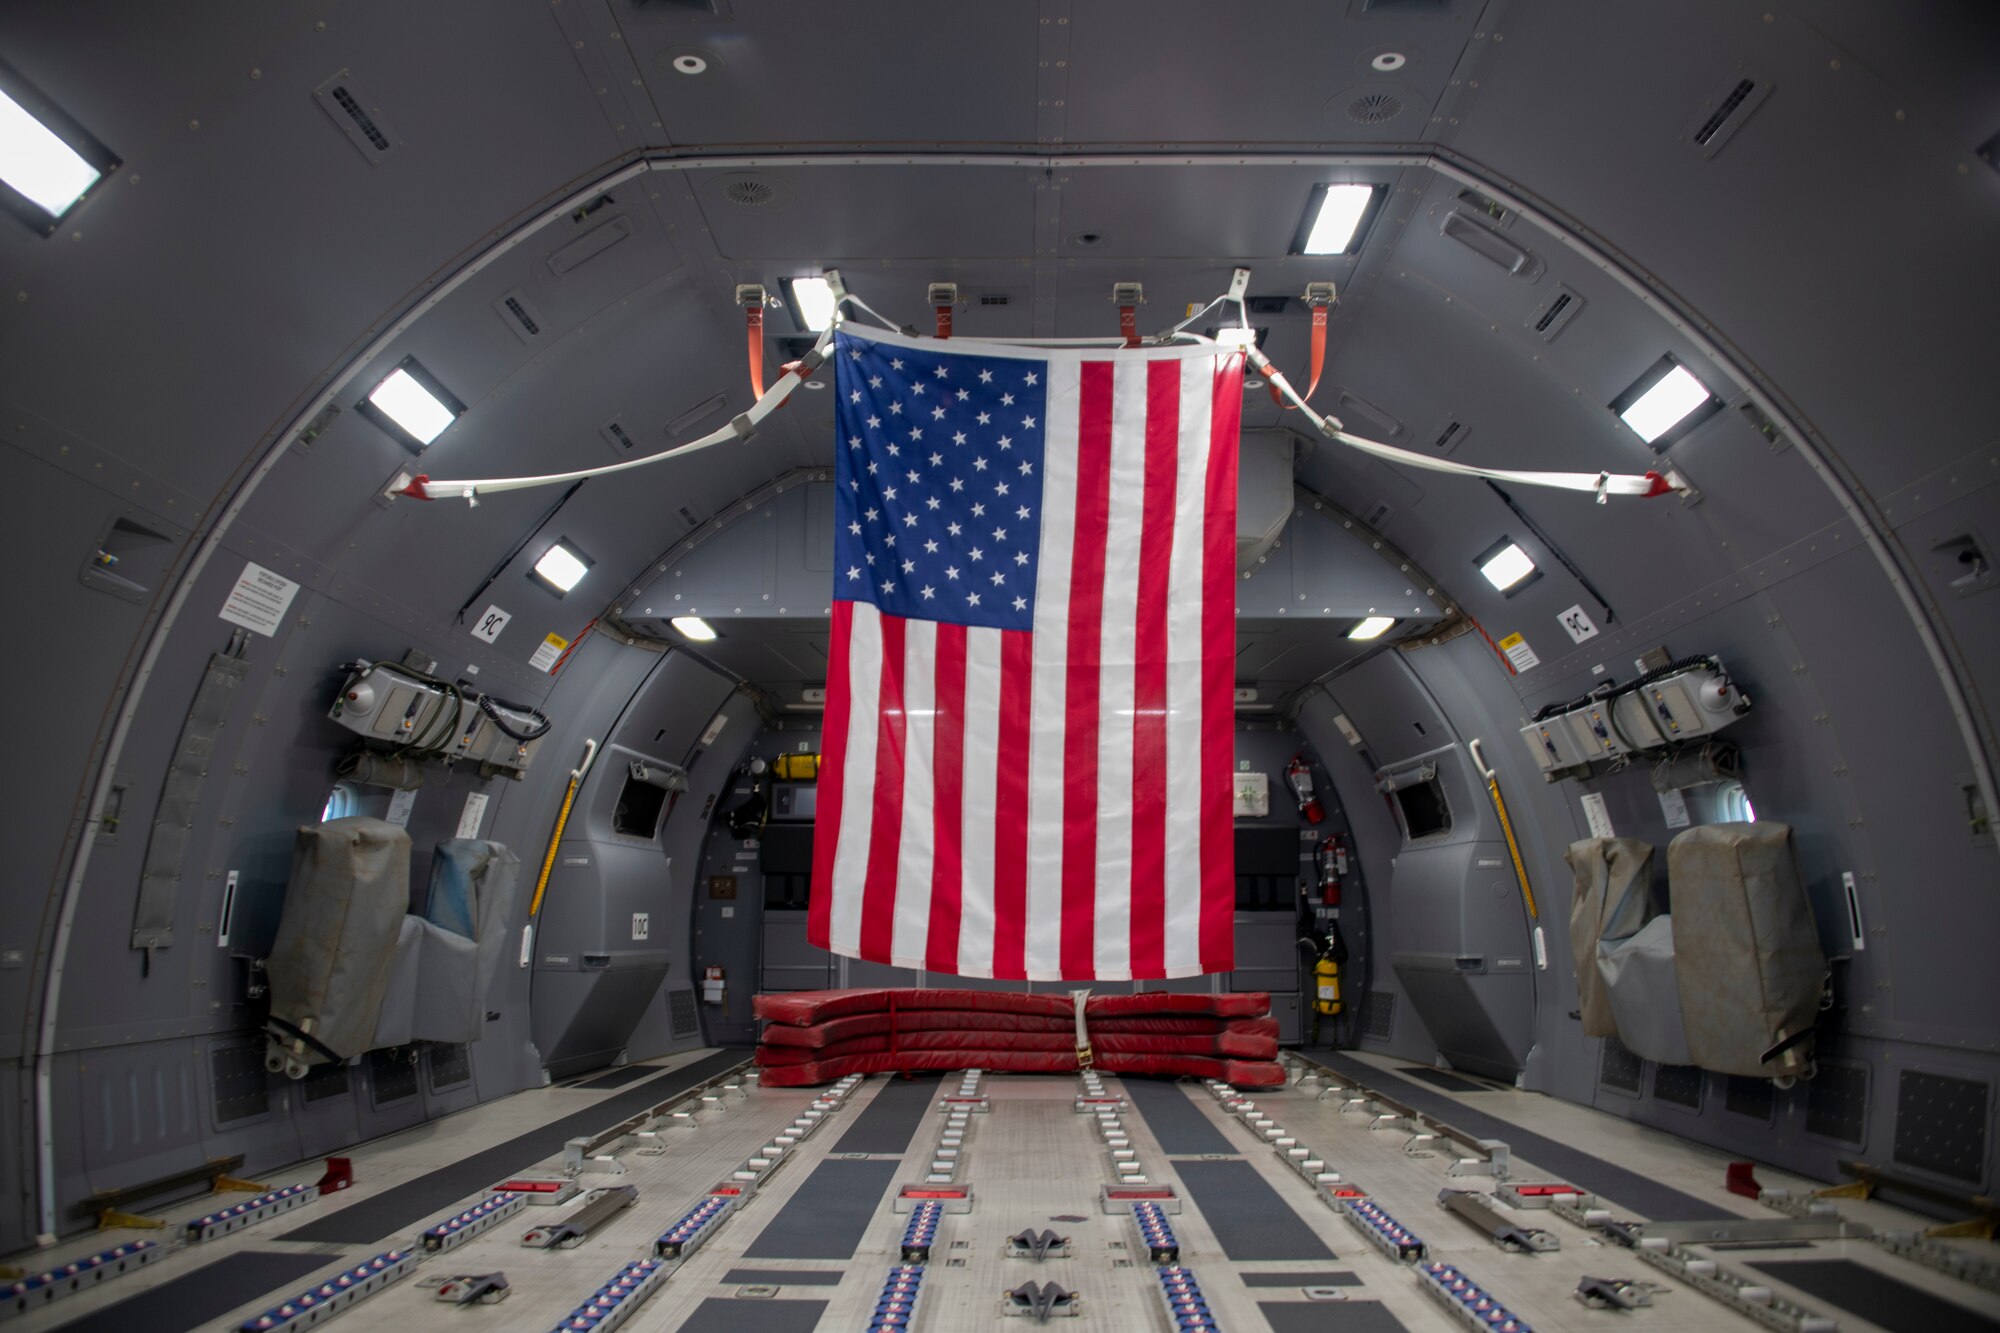 A flag is hung in the back of a KC-46 Pegasus, at Altus Air Force Base, Oklahoma, Oct. 8, 2021. This flag was flown inside the aircraft for the funeral of U.S. Army Air Forces 2nd Lt. Earnest Vienneau, 97th Bombardment Group, to be later given to the family after the flyover. (U.S. Air Force photo by Staff Sgt. Cody Dowell)